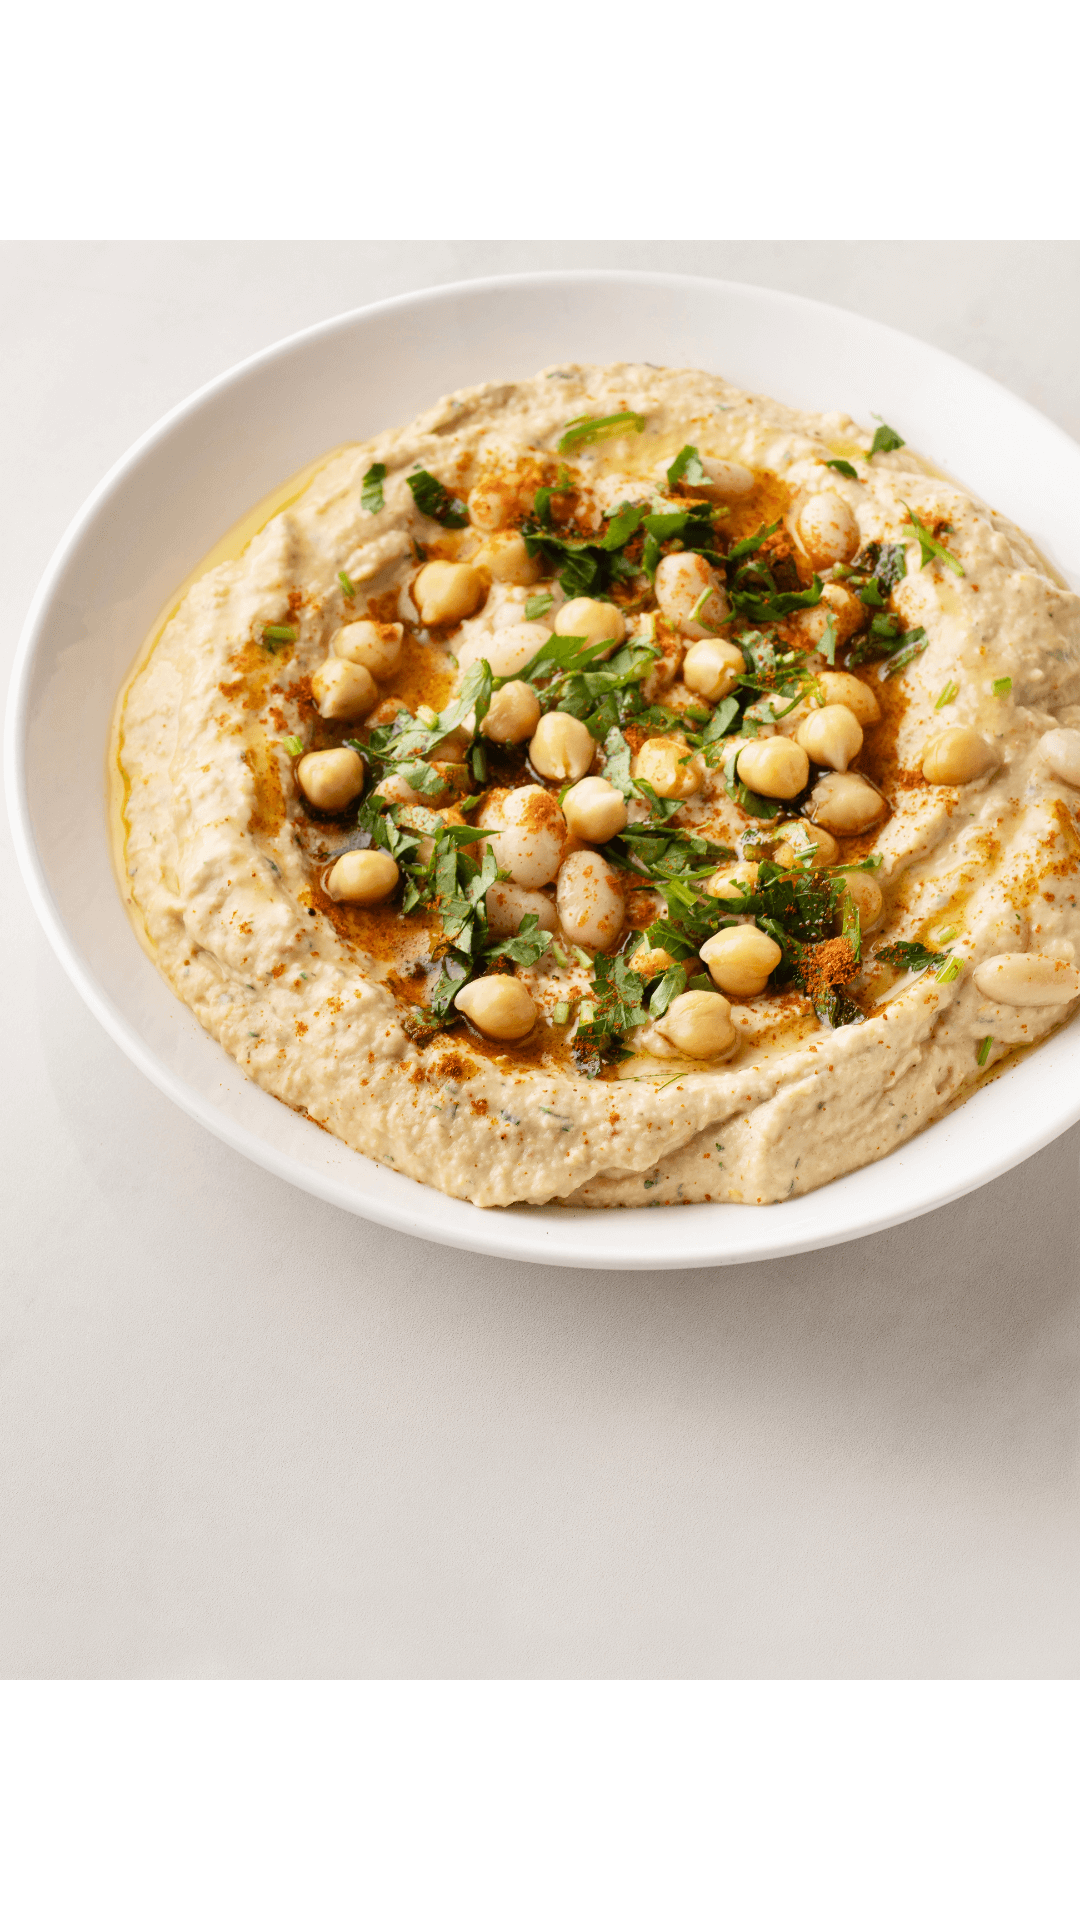 7 Best Home made Hummus Recipes For The Whole Family